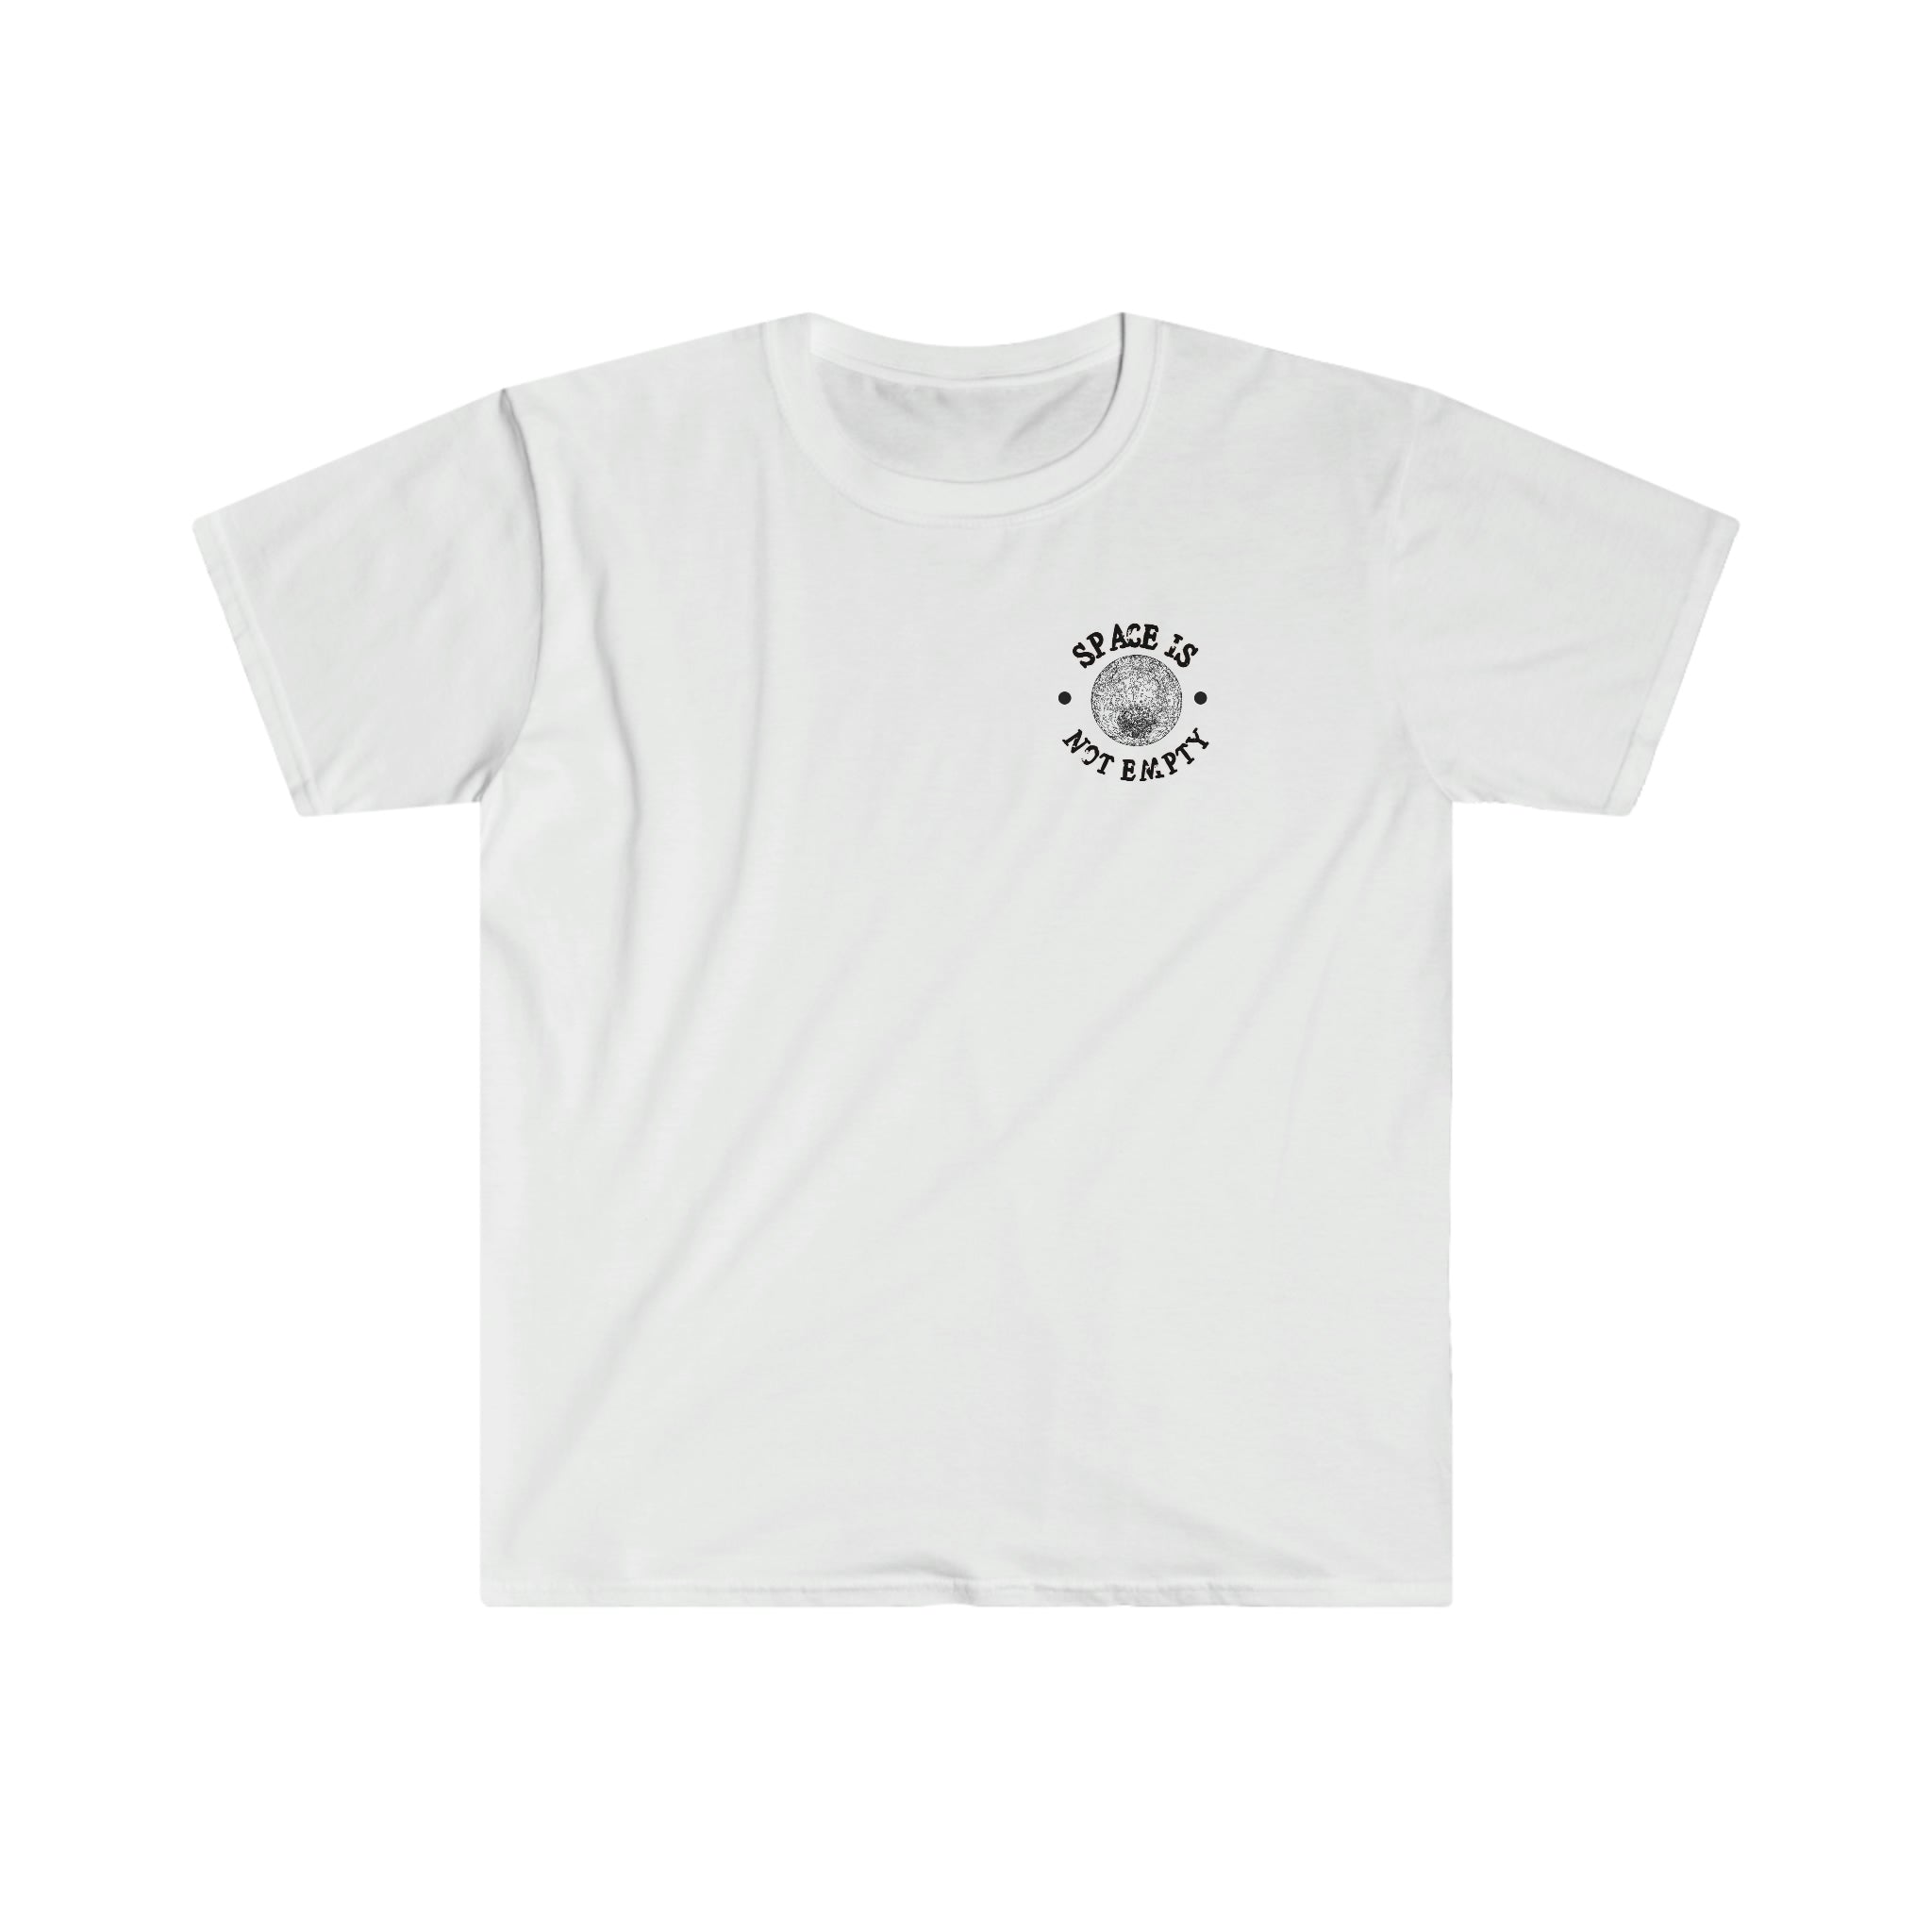 A white Space Station T-Shirt with a black space exploration logo on it.